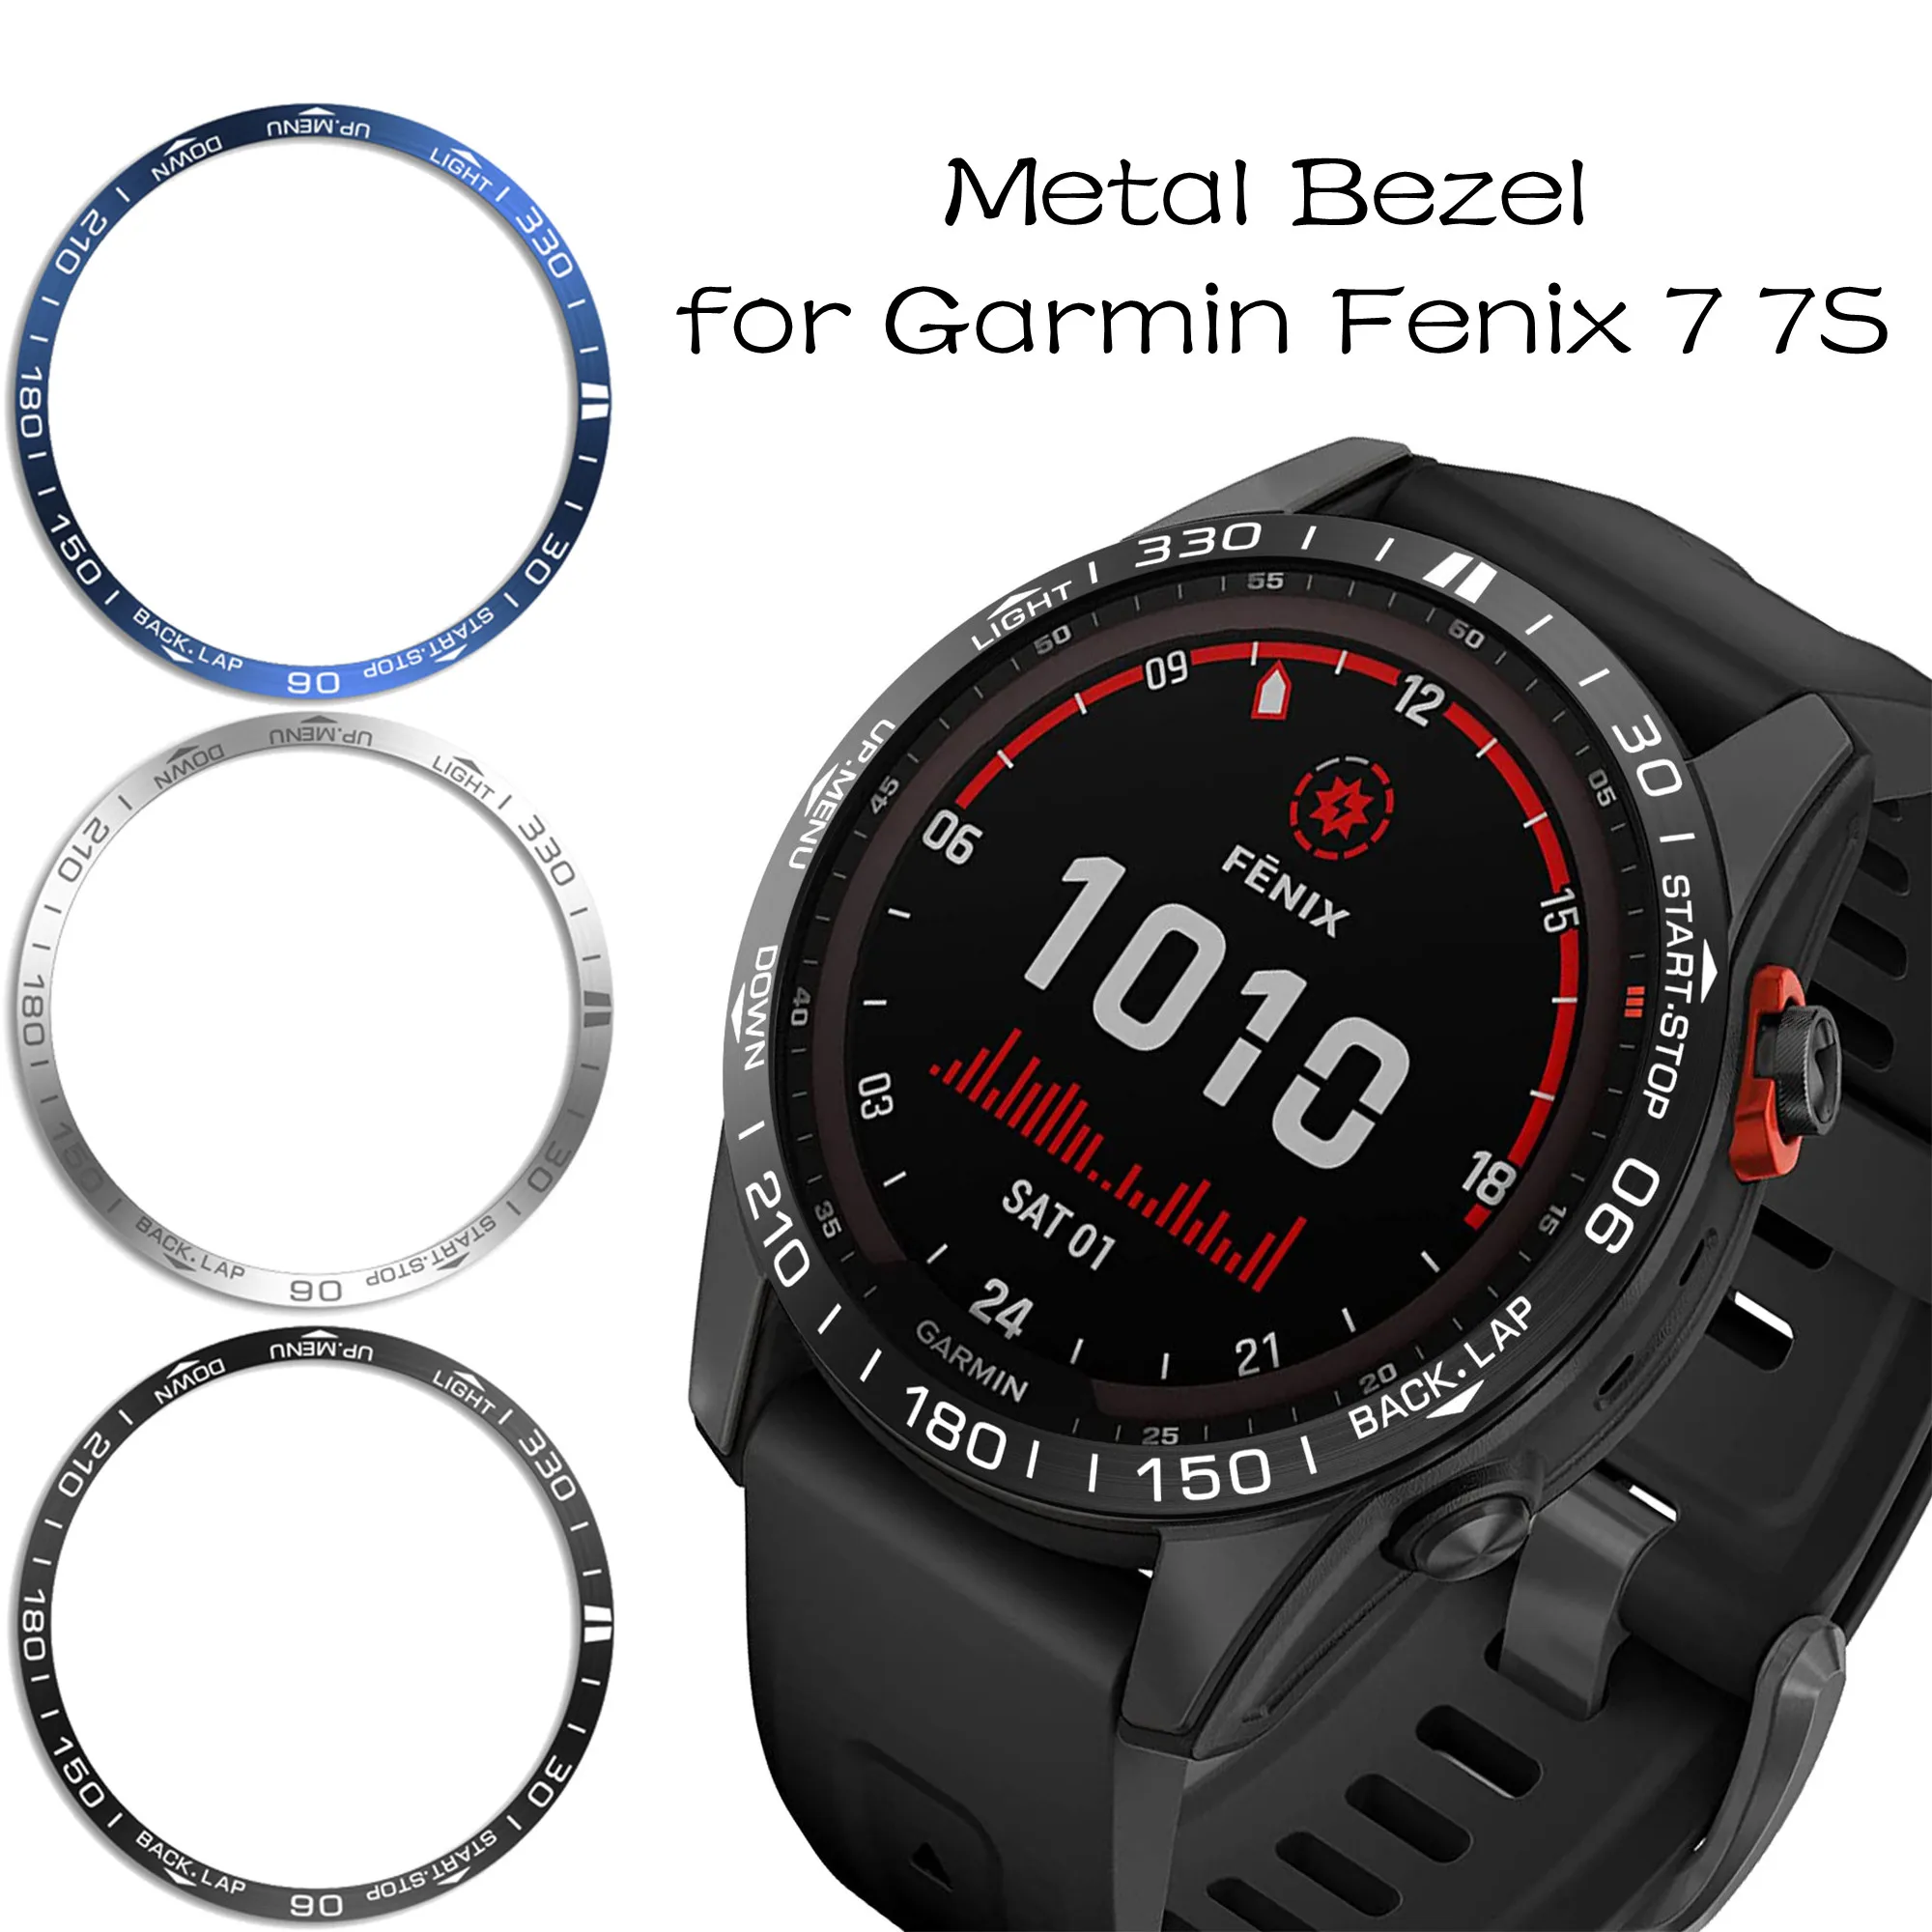  BAIHUIAM Bezel Ring Compatiable with Garmin Fenix 7X, Stainless  Steel Bezel Ring Adhesive Cover Anti Scratch & Collision Protector for Garmin  Fenix 7X Sapphire Solar (Black - Not for 7/7S) 